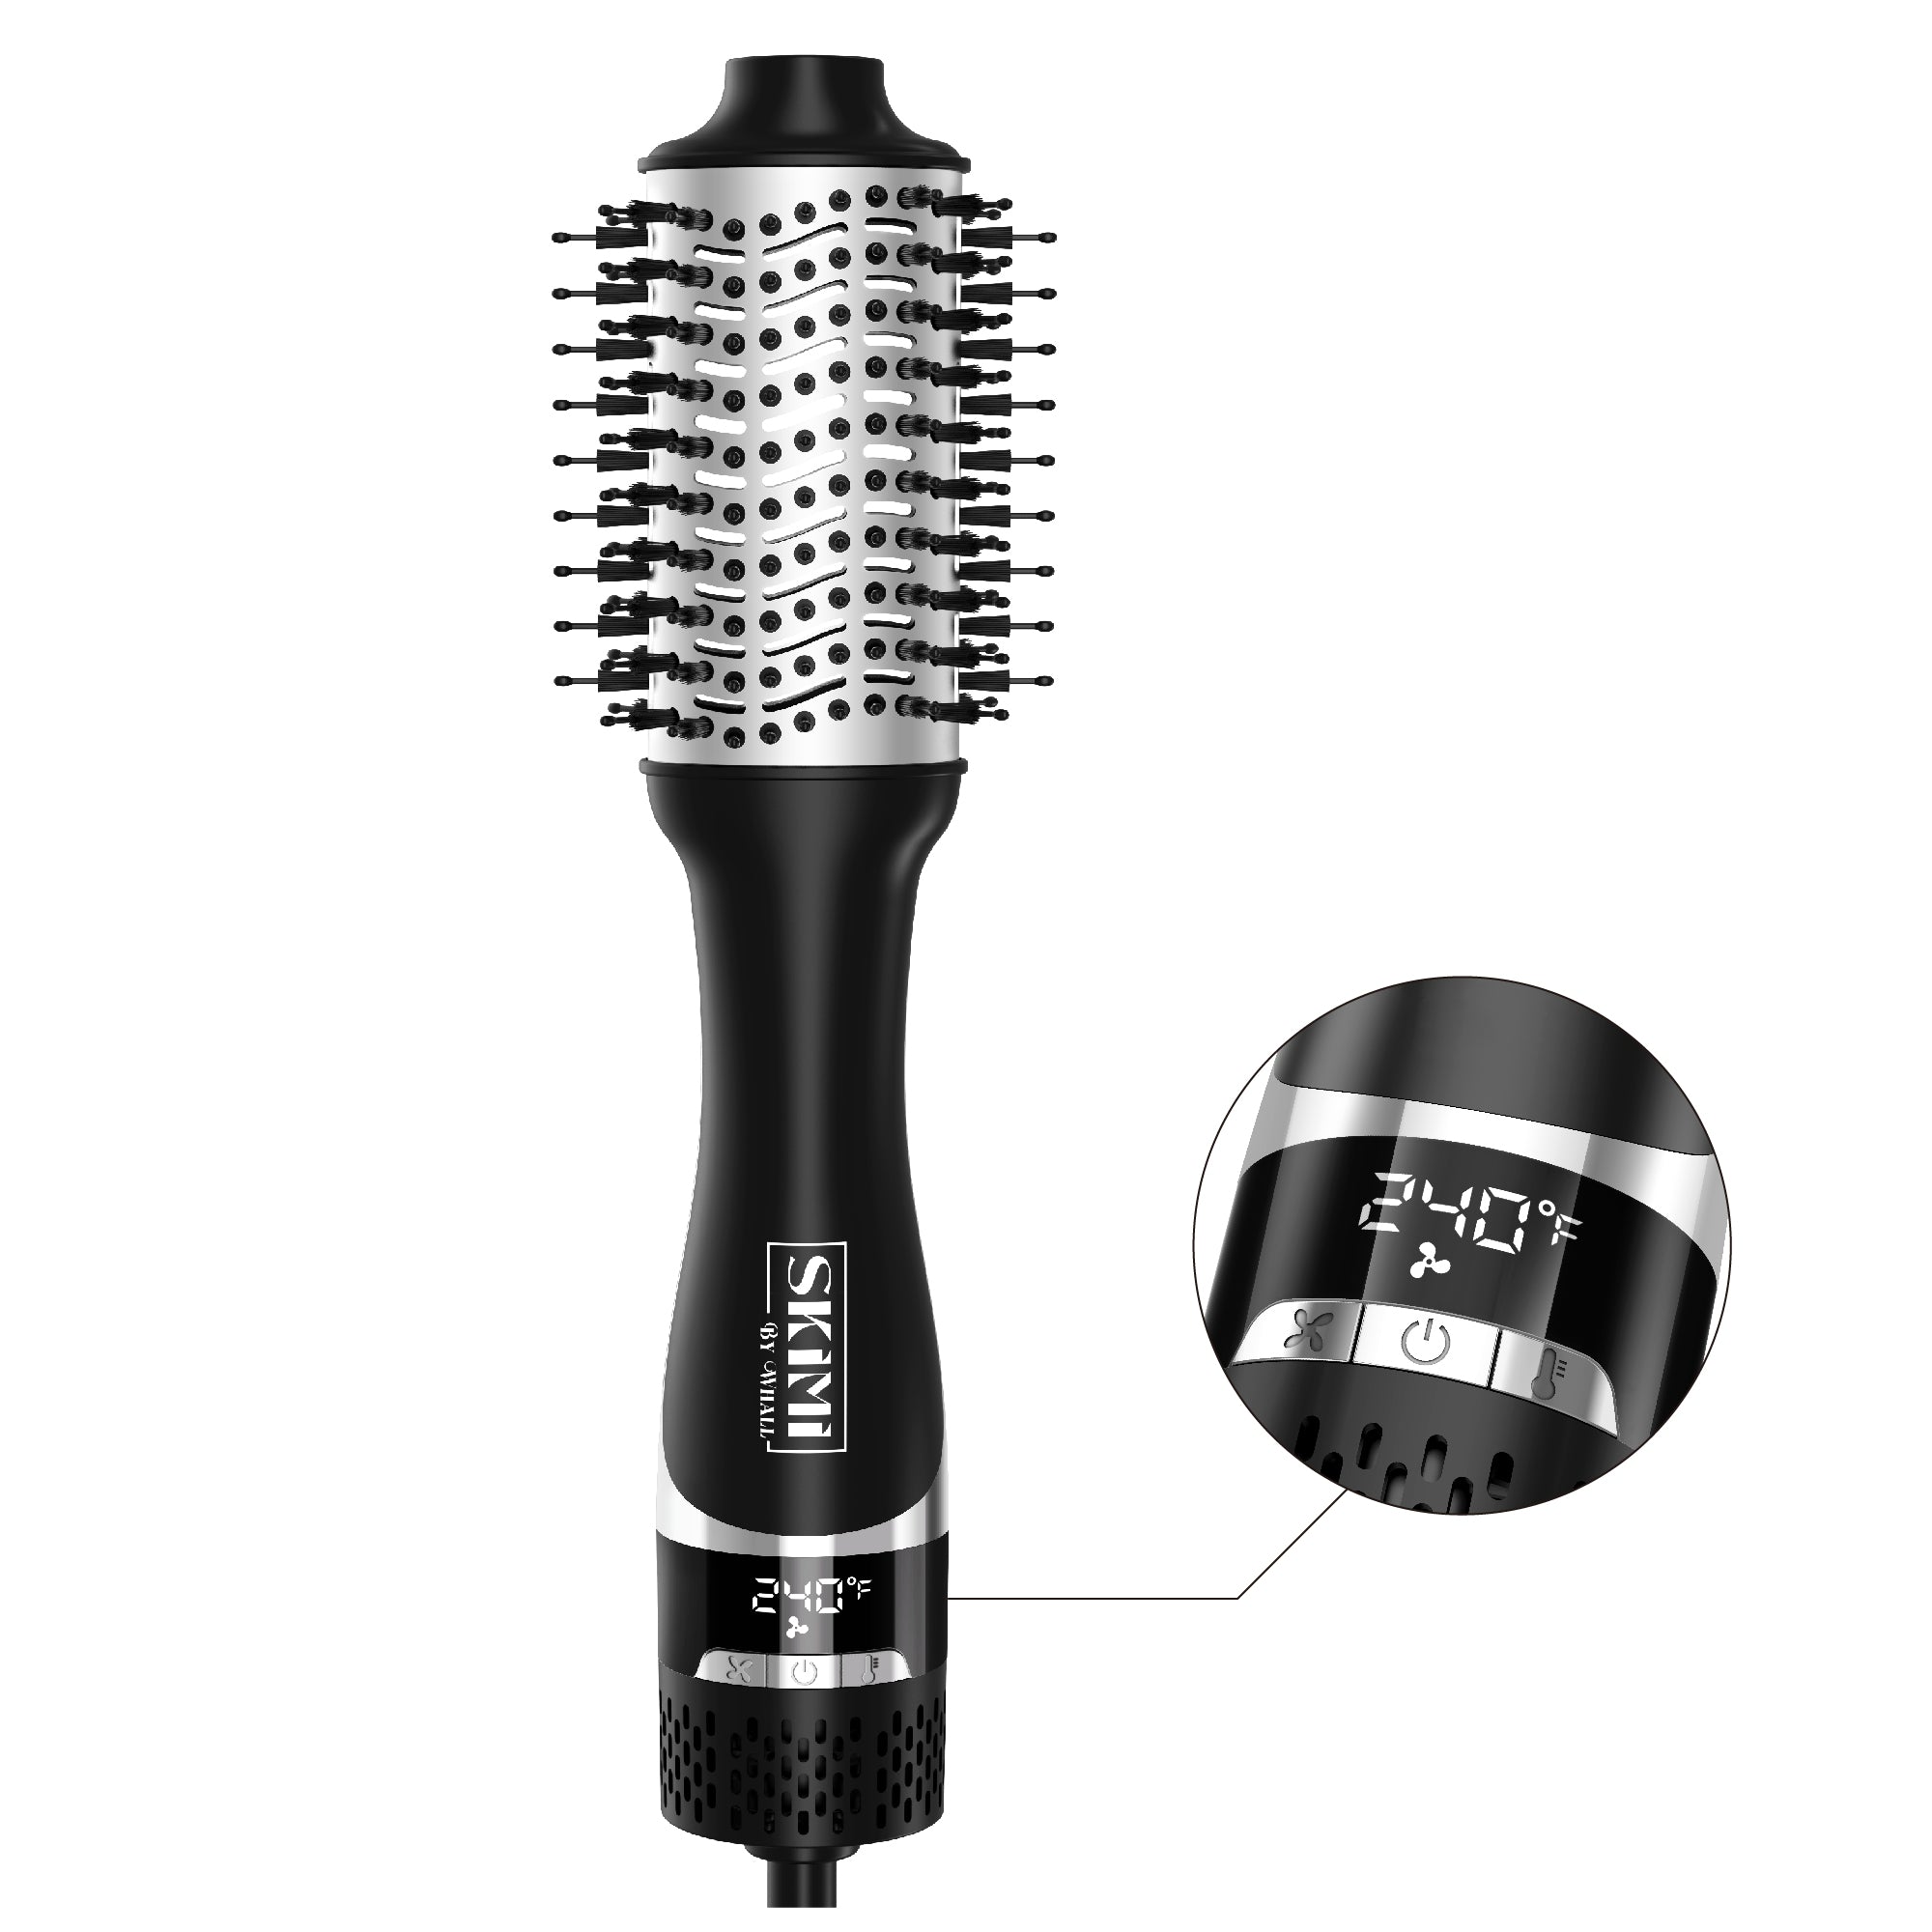 SKIMI by Whall Hair Dryer Brush, Blow Dryer Brush with LED Display Screen, Temp Seperate Control